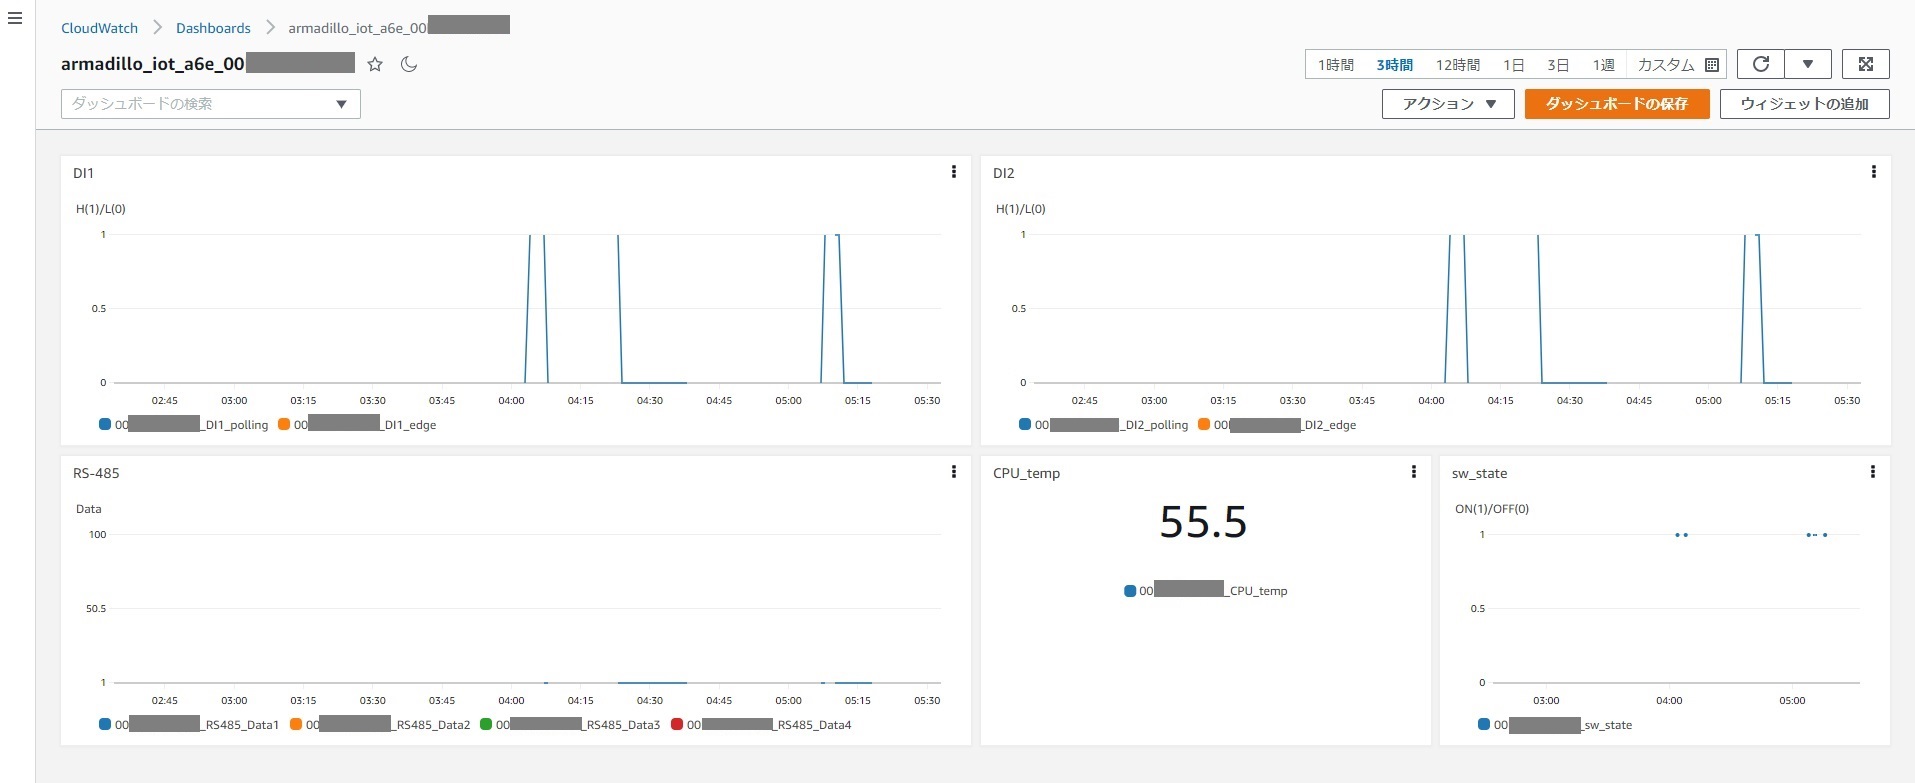 images/a6e-aws-cloudwatch-dashboard-all.png